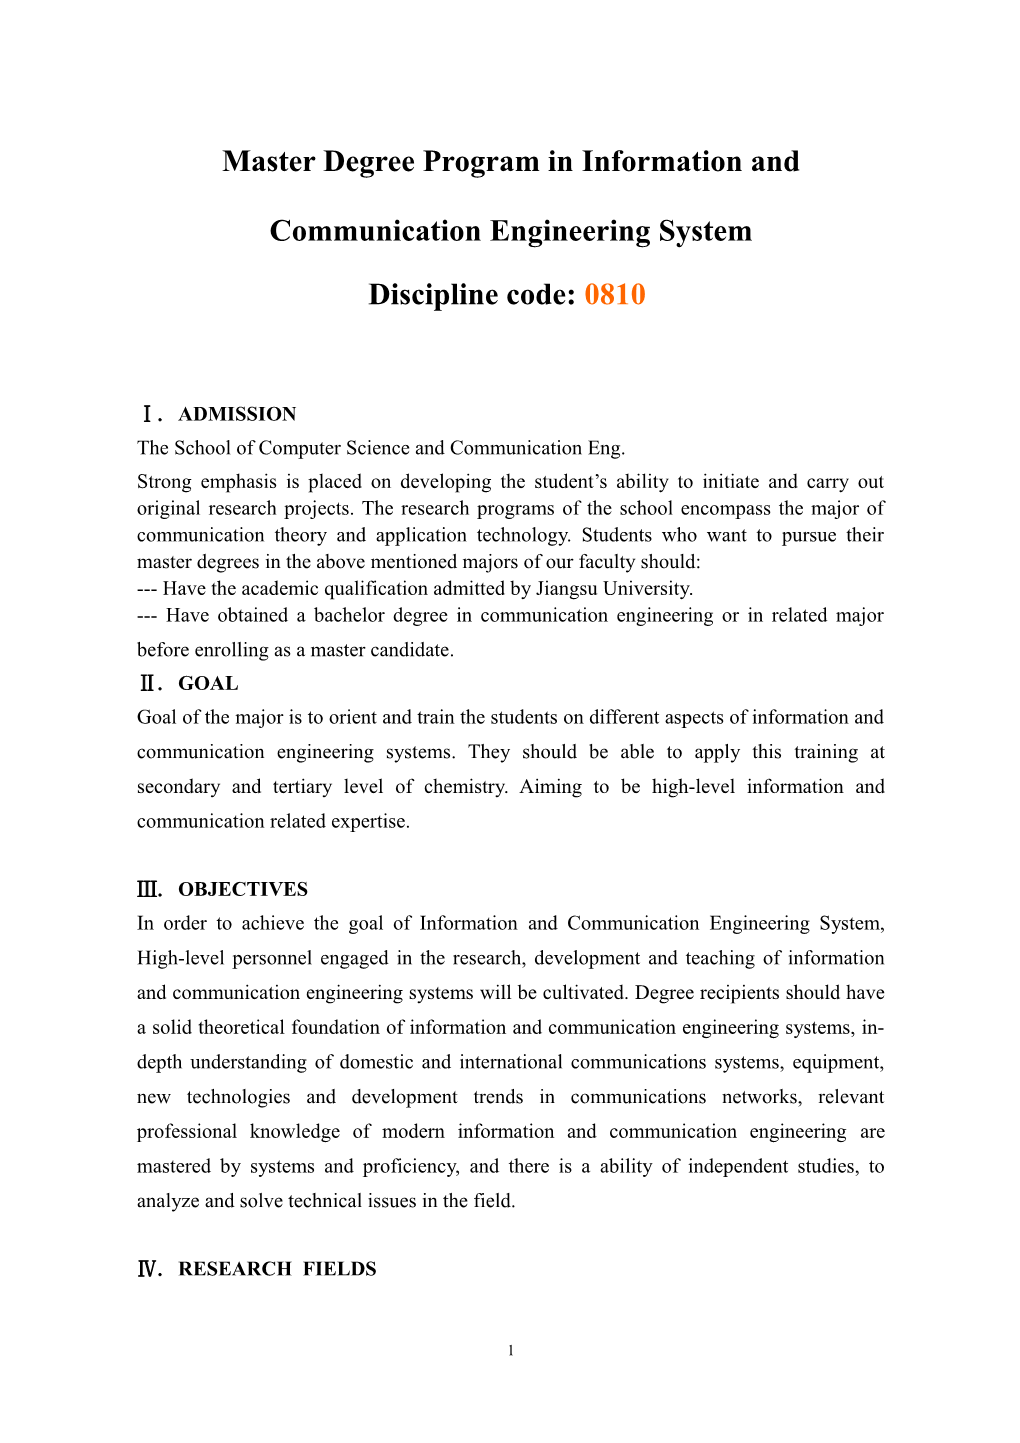 Master Degree Program in Information and Communication Engineering System